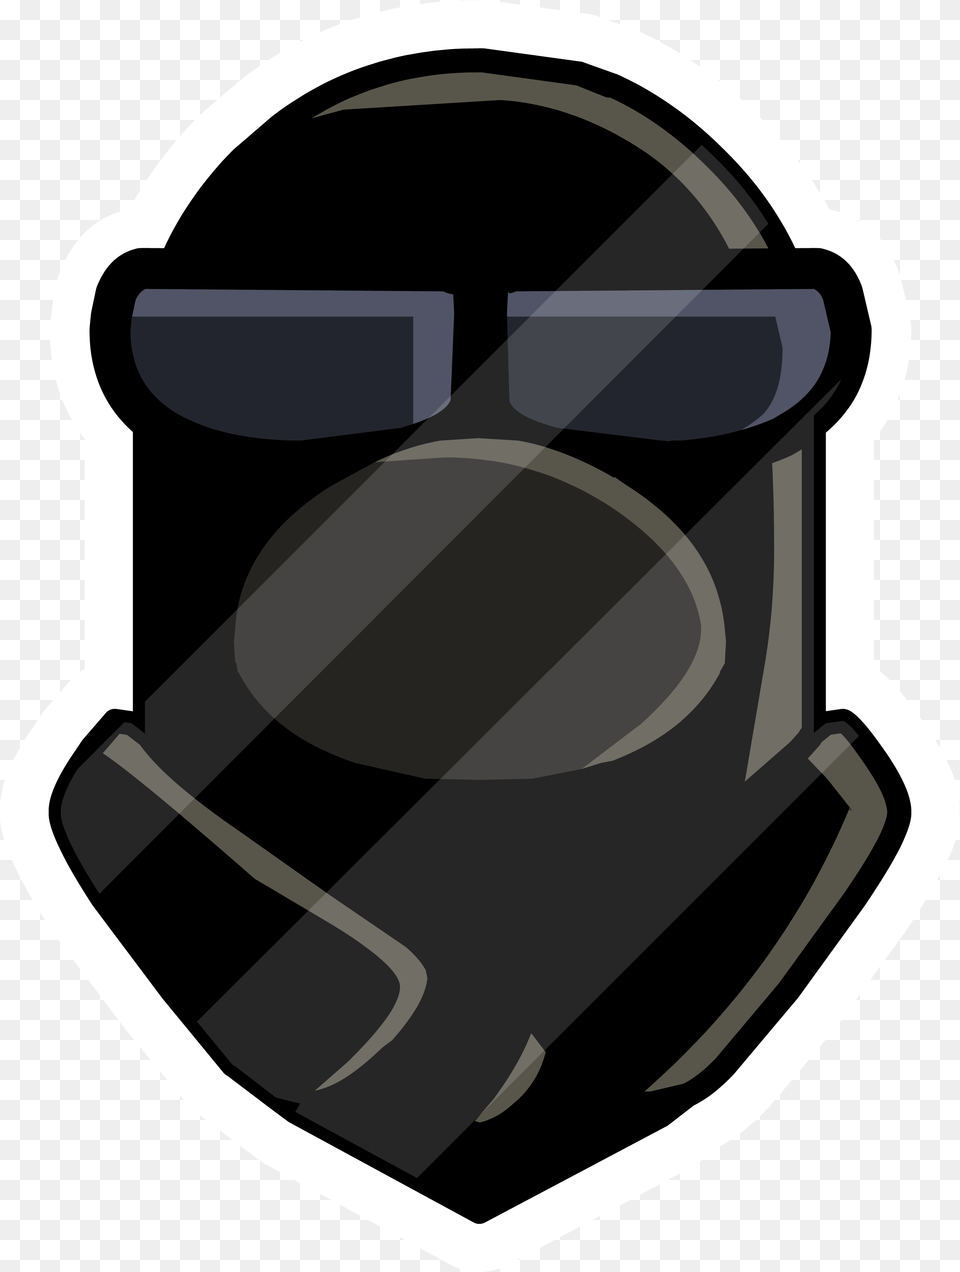 Spy Trivia Pin Icon Illustration, Ammunition, Grenade, Weapon, Accessories Png